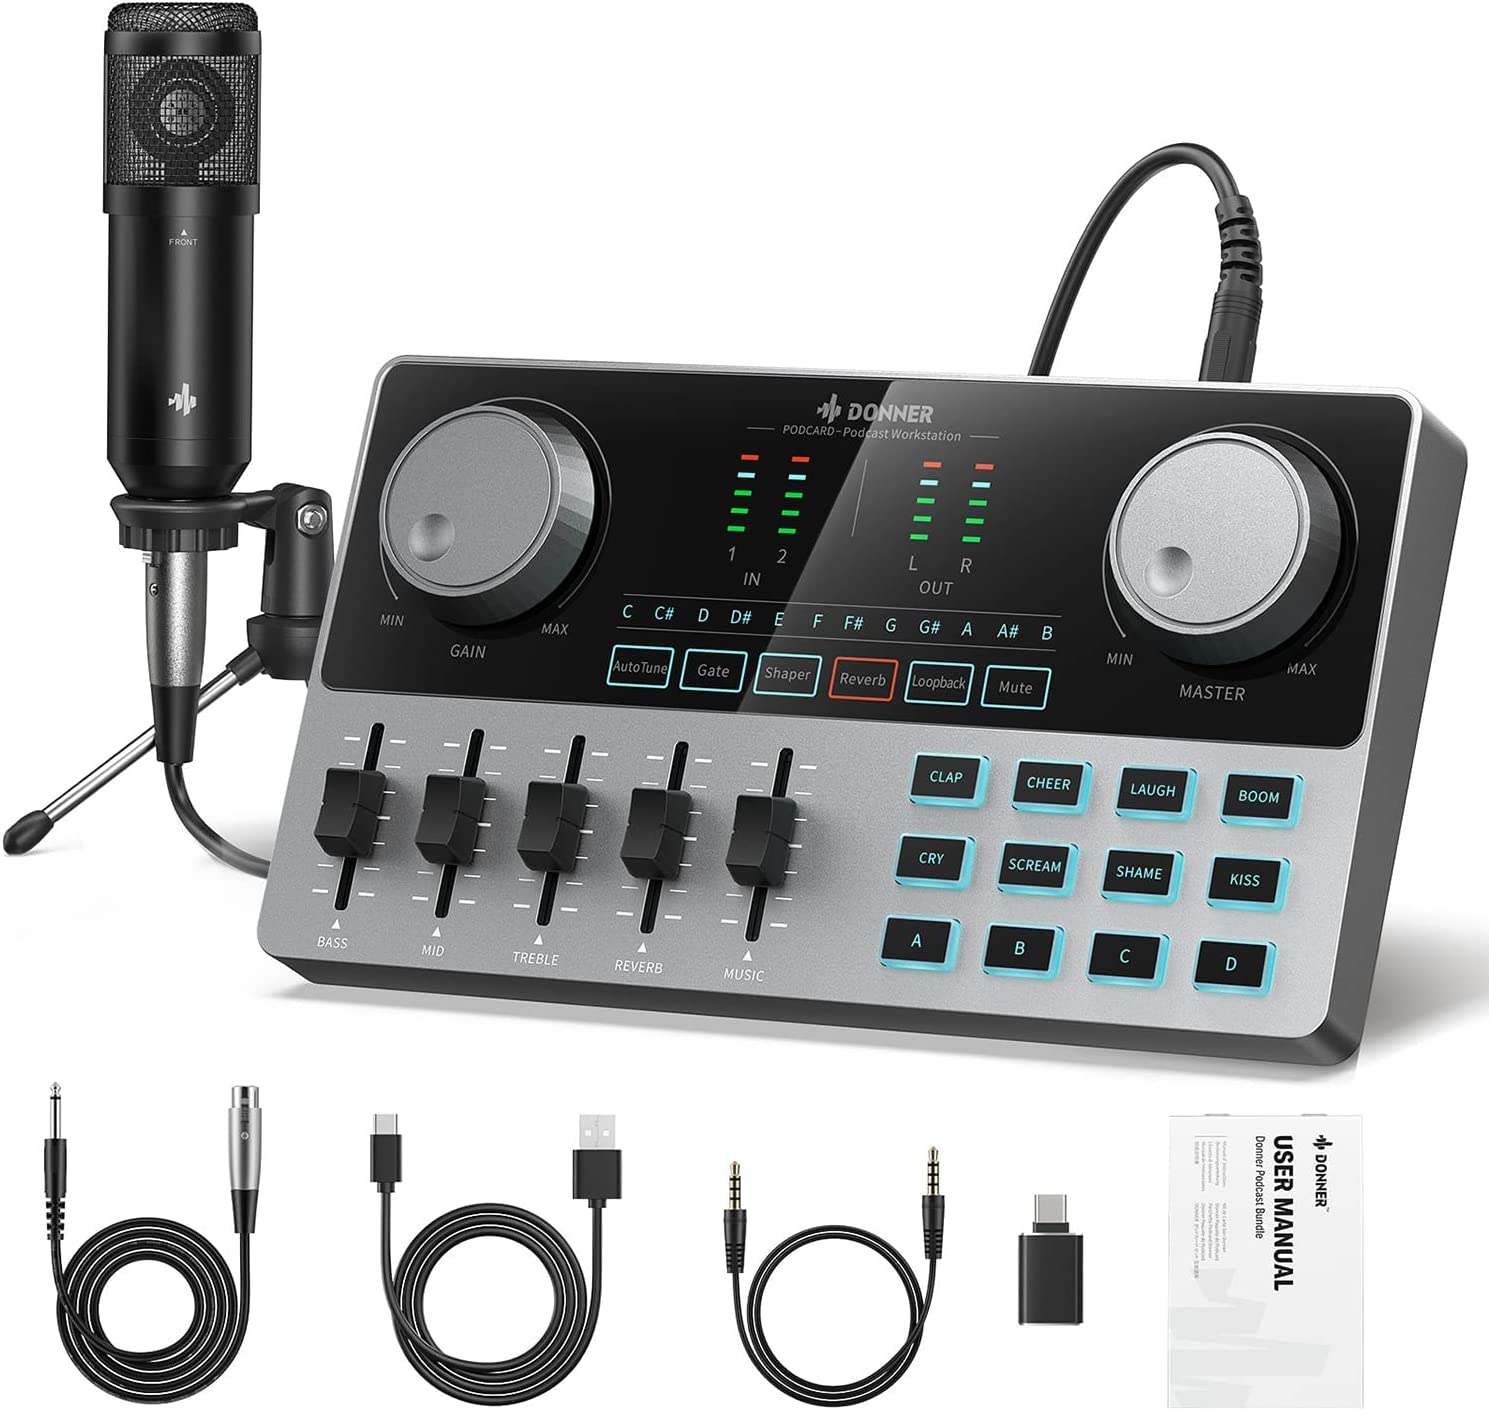  Asmuse USB Audio Interface, 24Bit/196kHz Professional Sound  Card, Audio Mixer with XLR/TSR/TS Ports for Guitarist, Vocalist, Podcaster  or Producer (Black) : Electronics